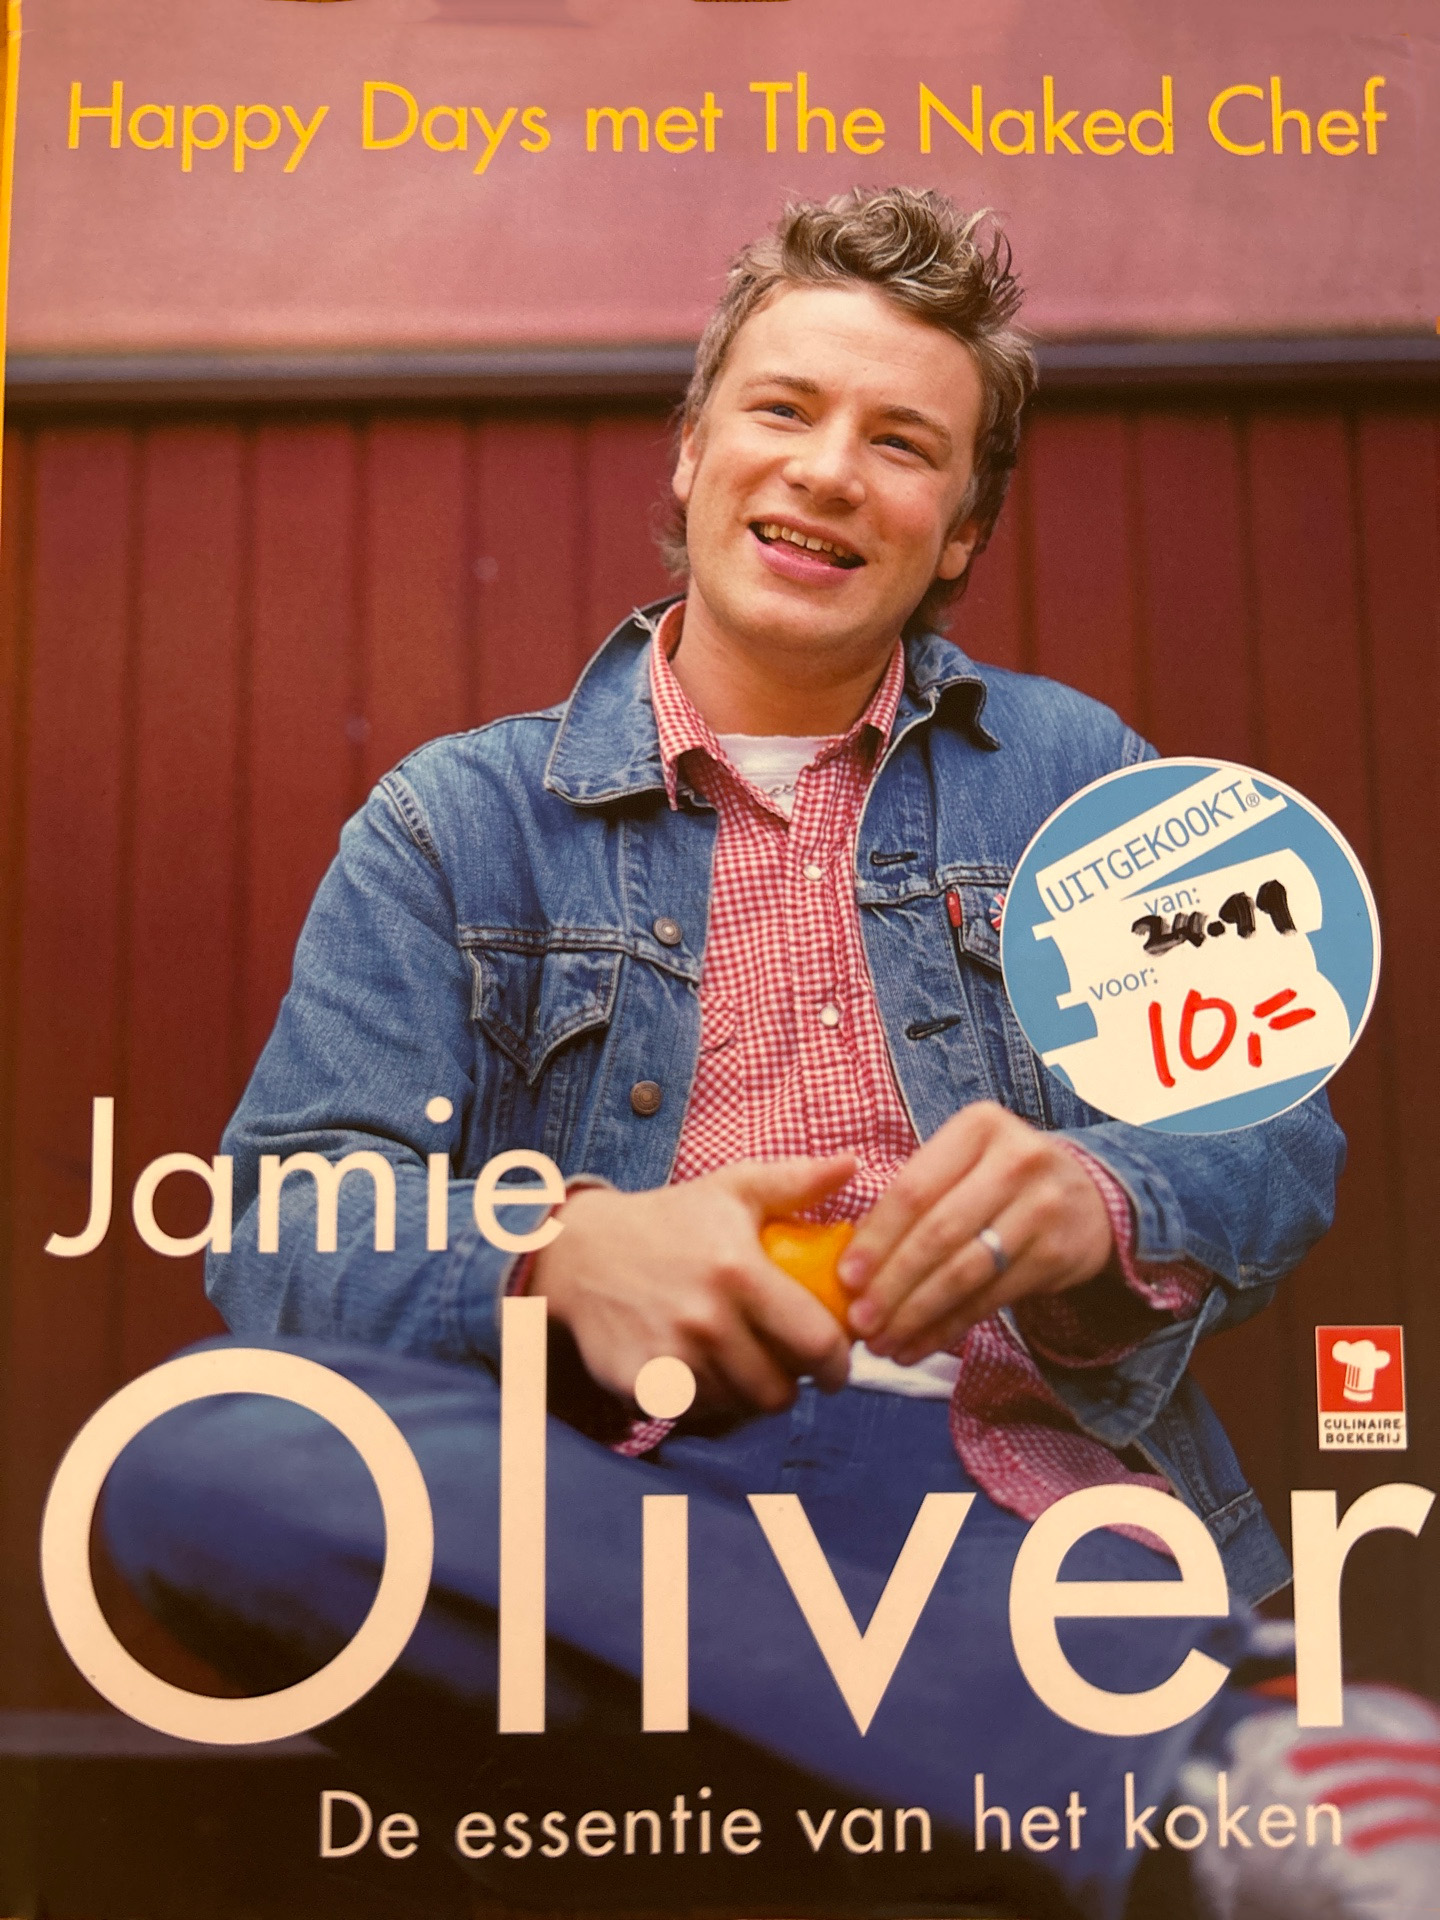 Happy Days met The Naked Chef – Jamie Oliver